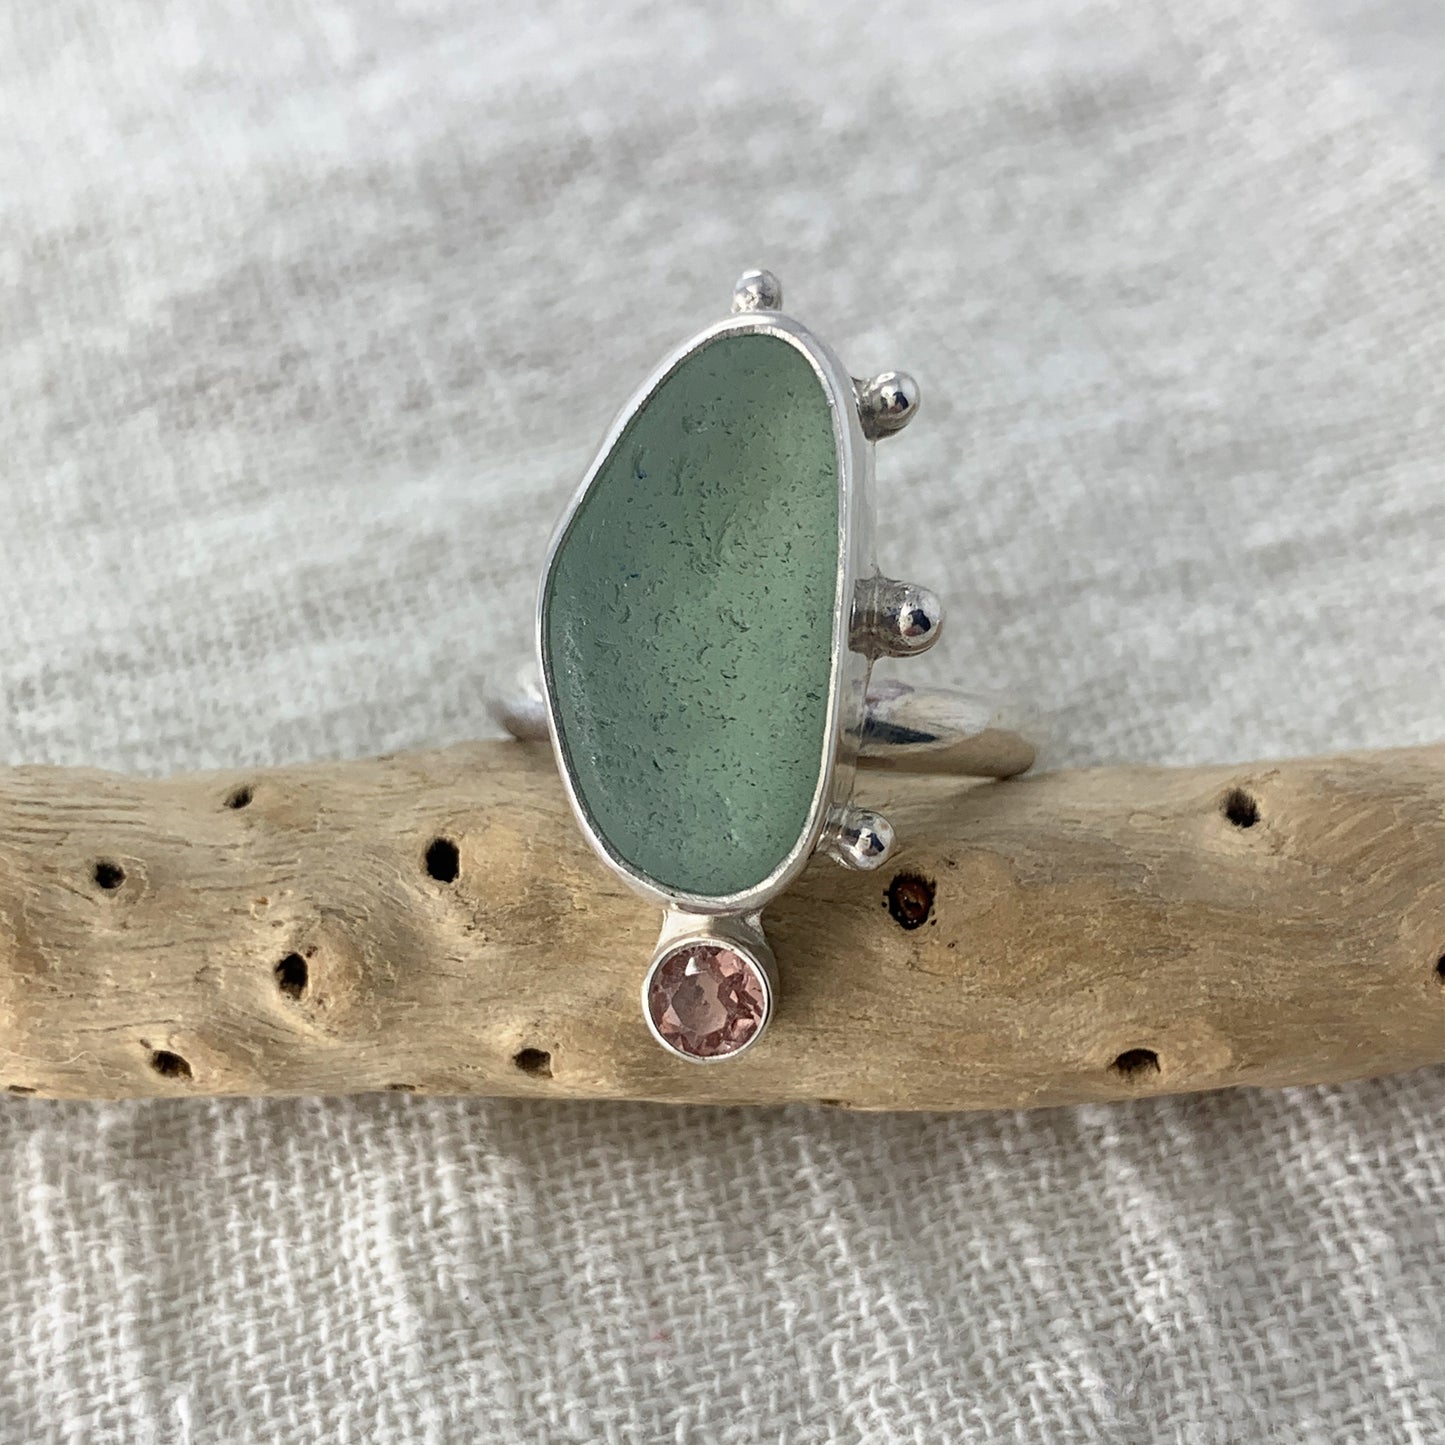 Seaglass Ring No. 2 • Size 8.5